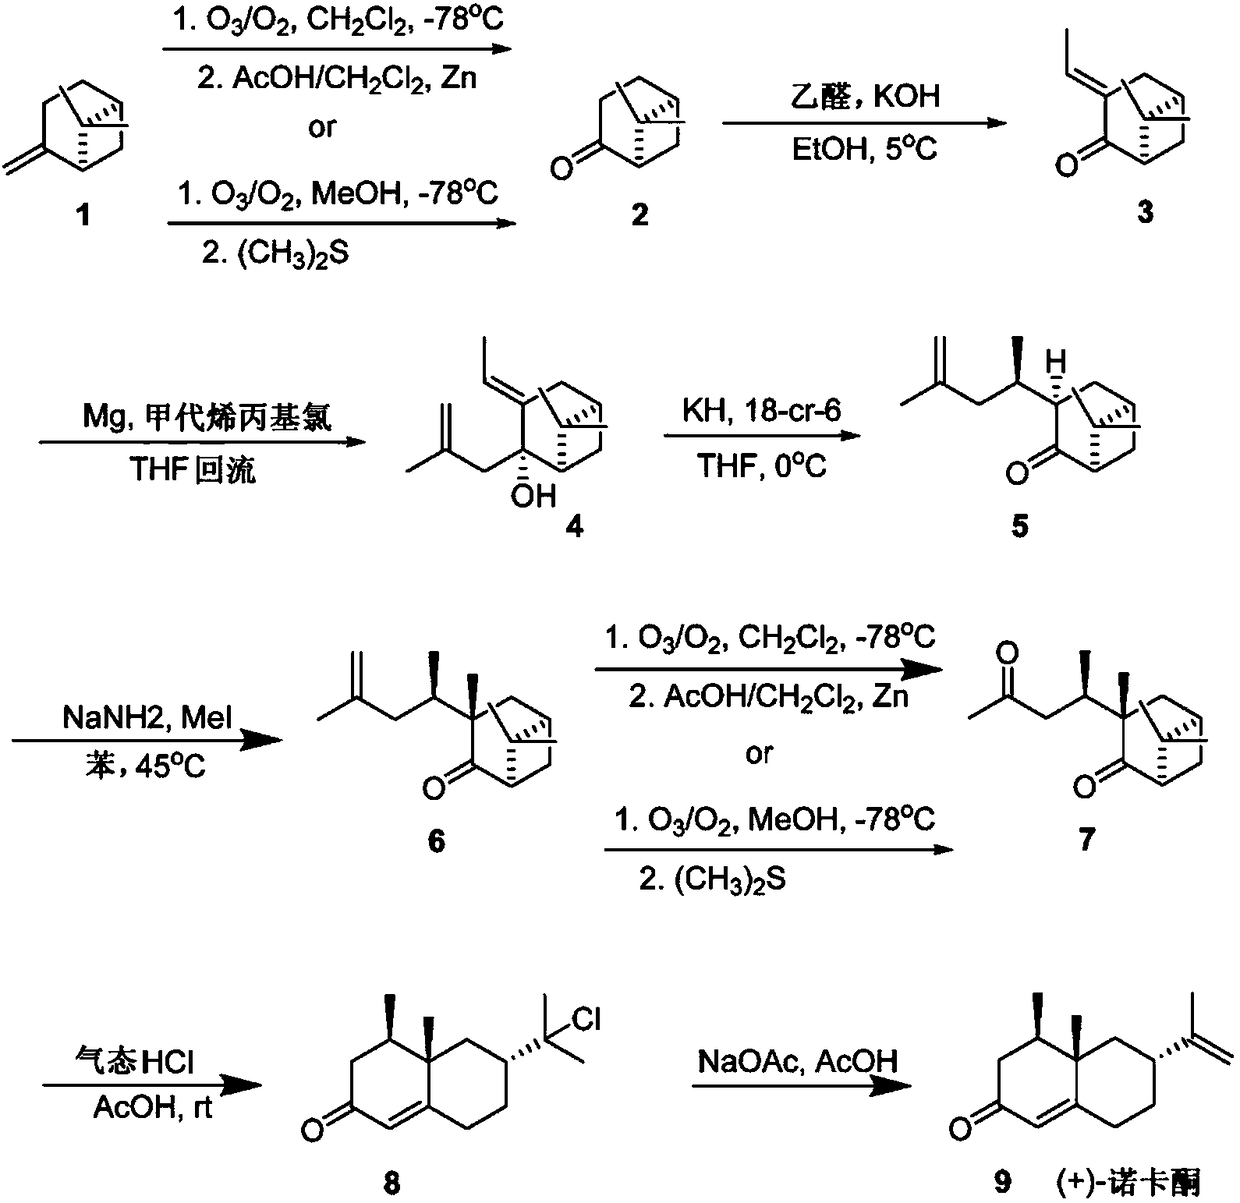 Reaction sequence for the synthesis of nootkatone, dihydronootkatone, and tetrahydronootkatone